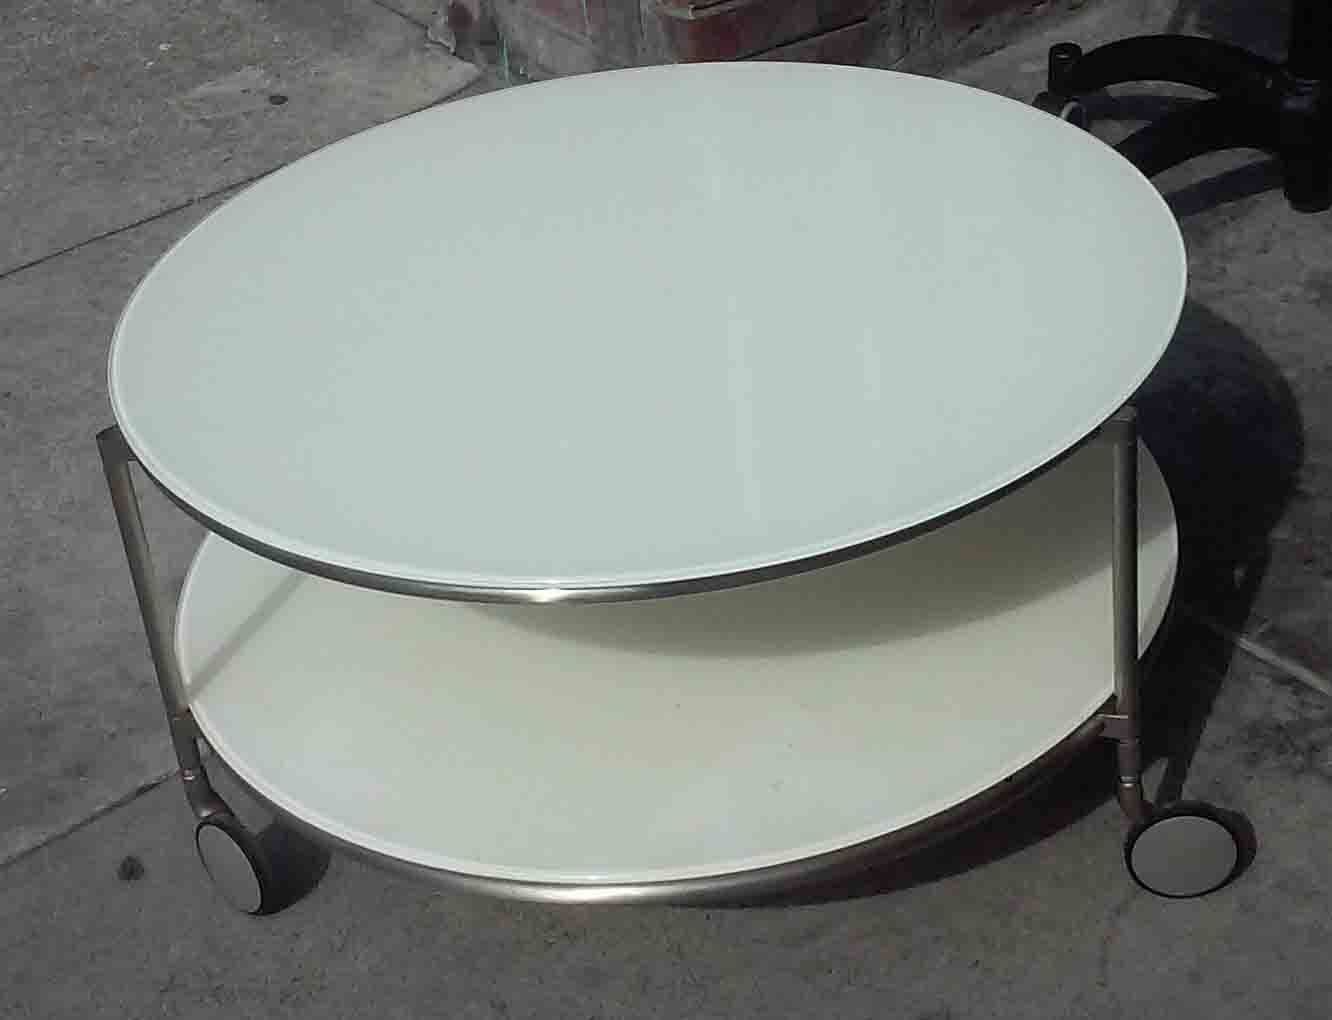 Caster Coffee Tables On Hayneedle With Wheels Round Glass Table With Regard To Glass Coffee Tables With Casters (Photo 4 of 30)